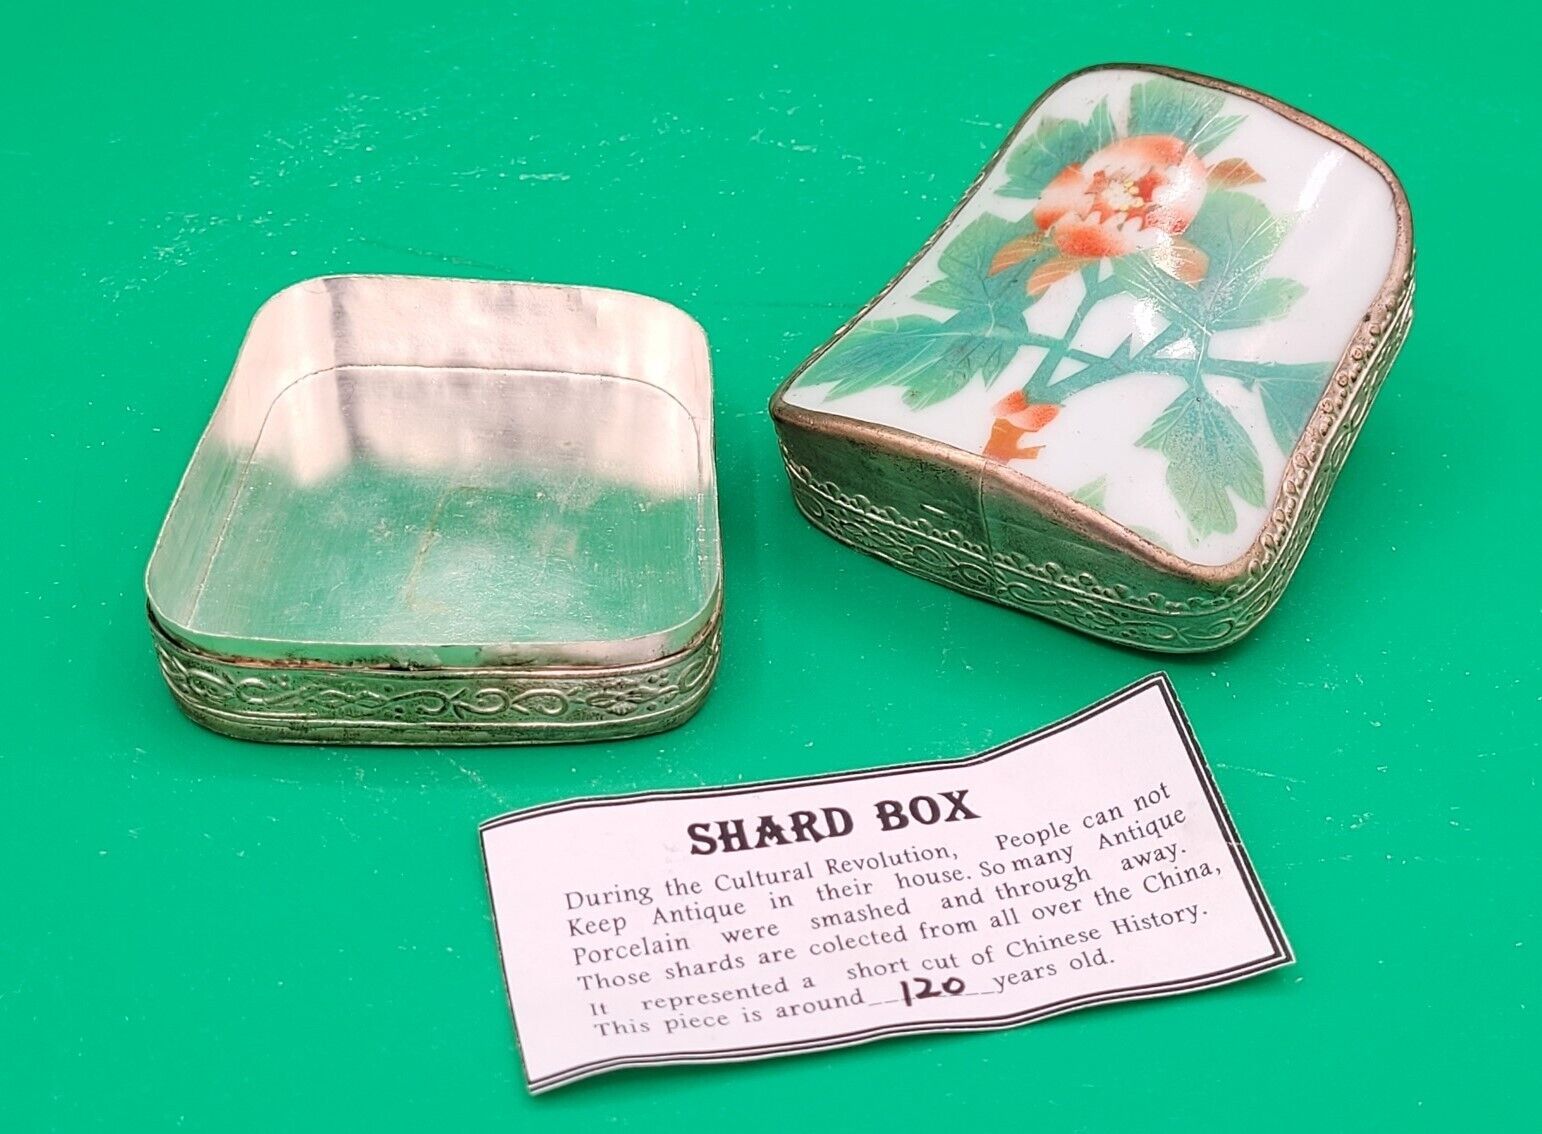 Antique CHINESE PORCELAIN Silver SHARD BOX - Hand Made - HISTORY in your HANDS